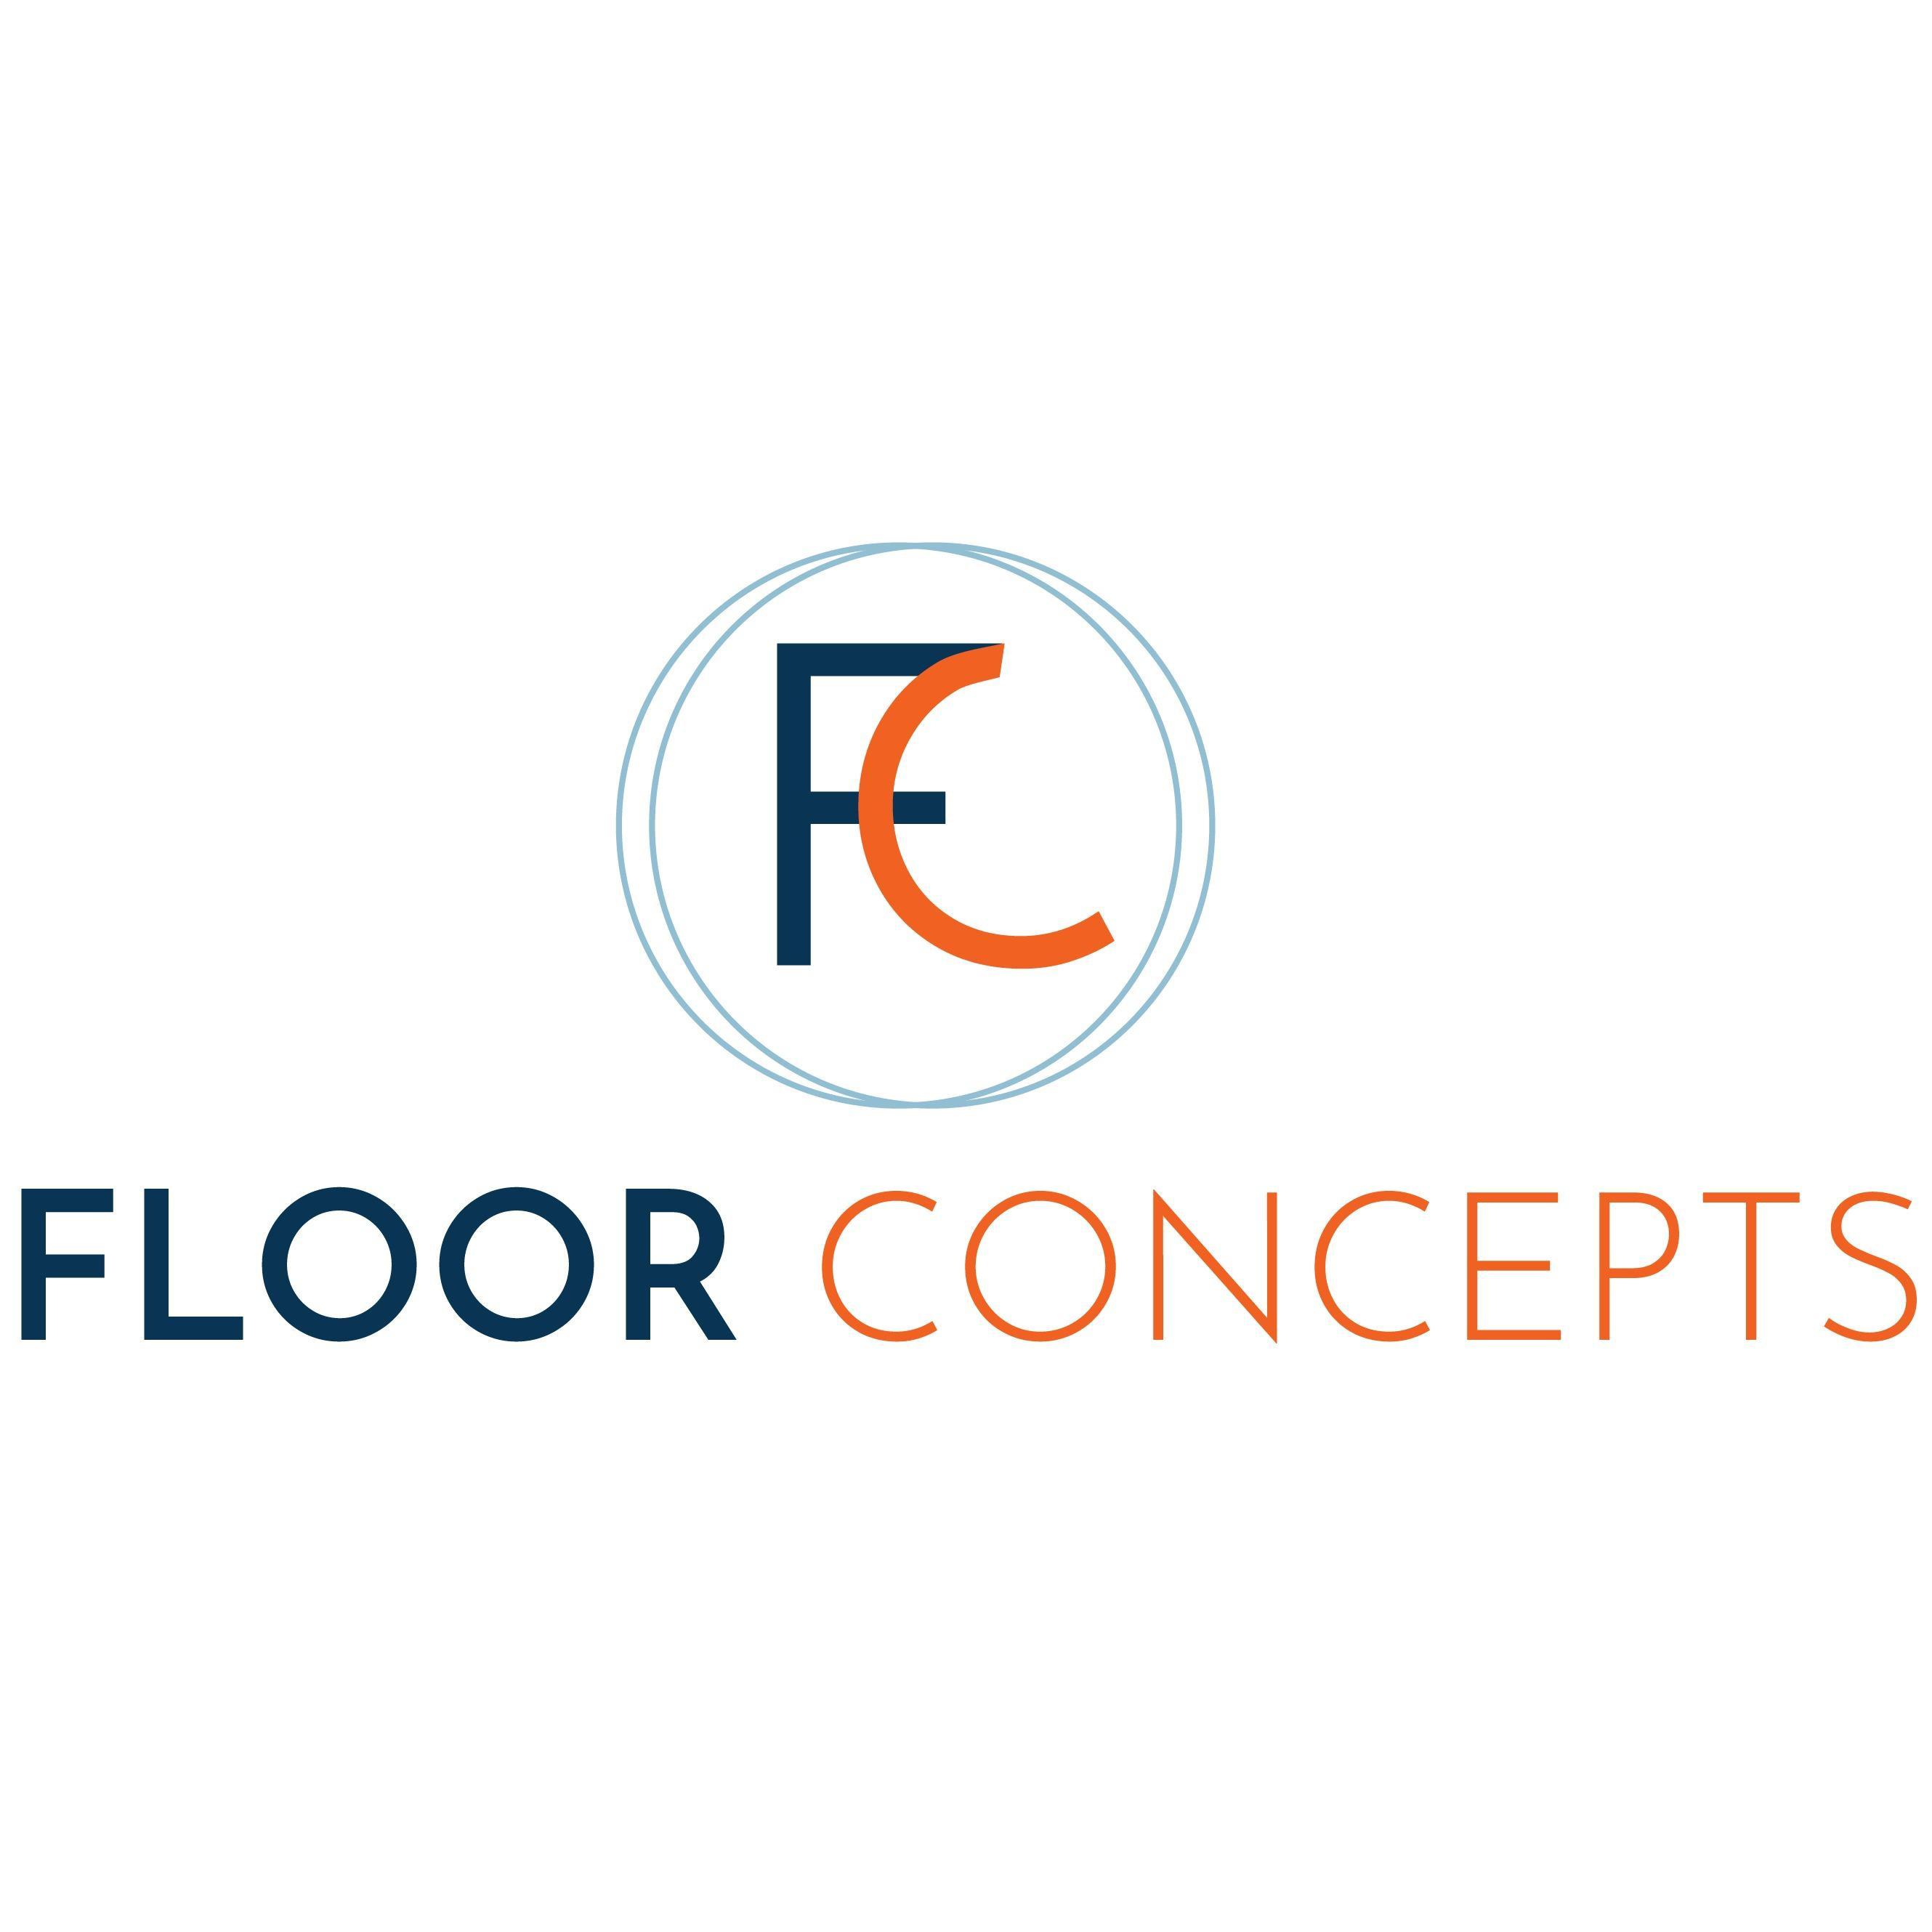 Floor Concepts - Wexford, PA 15090 - (724)935-4600 | ShowMeLocal.com